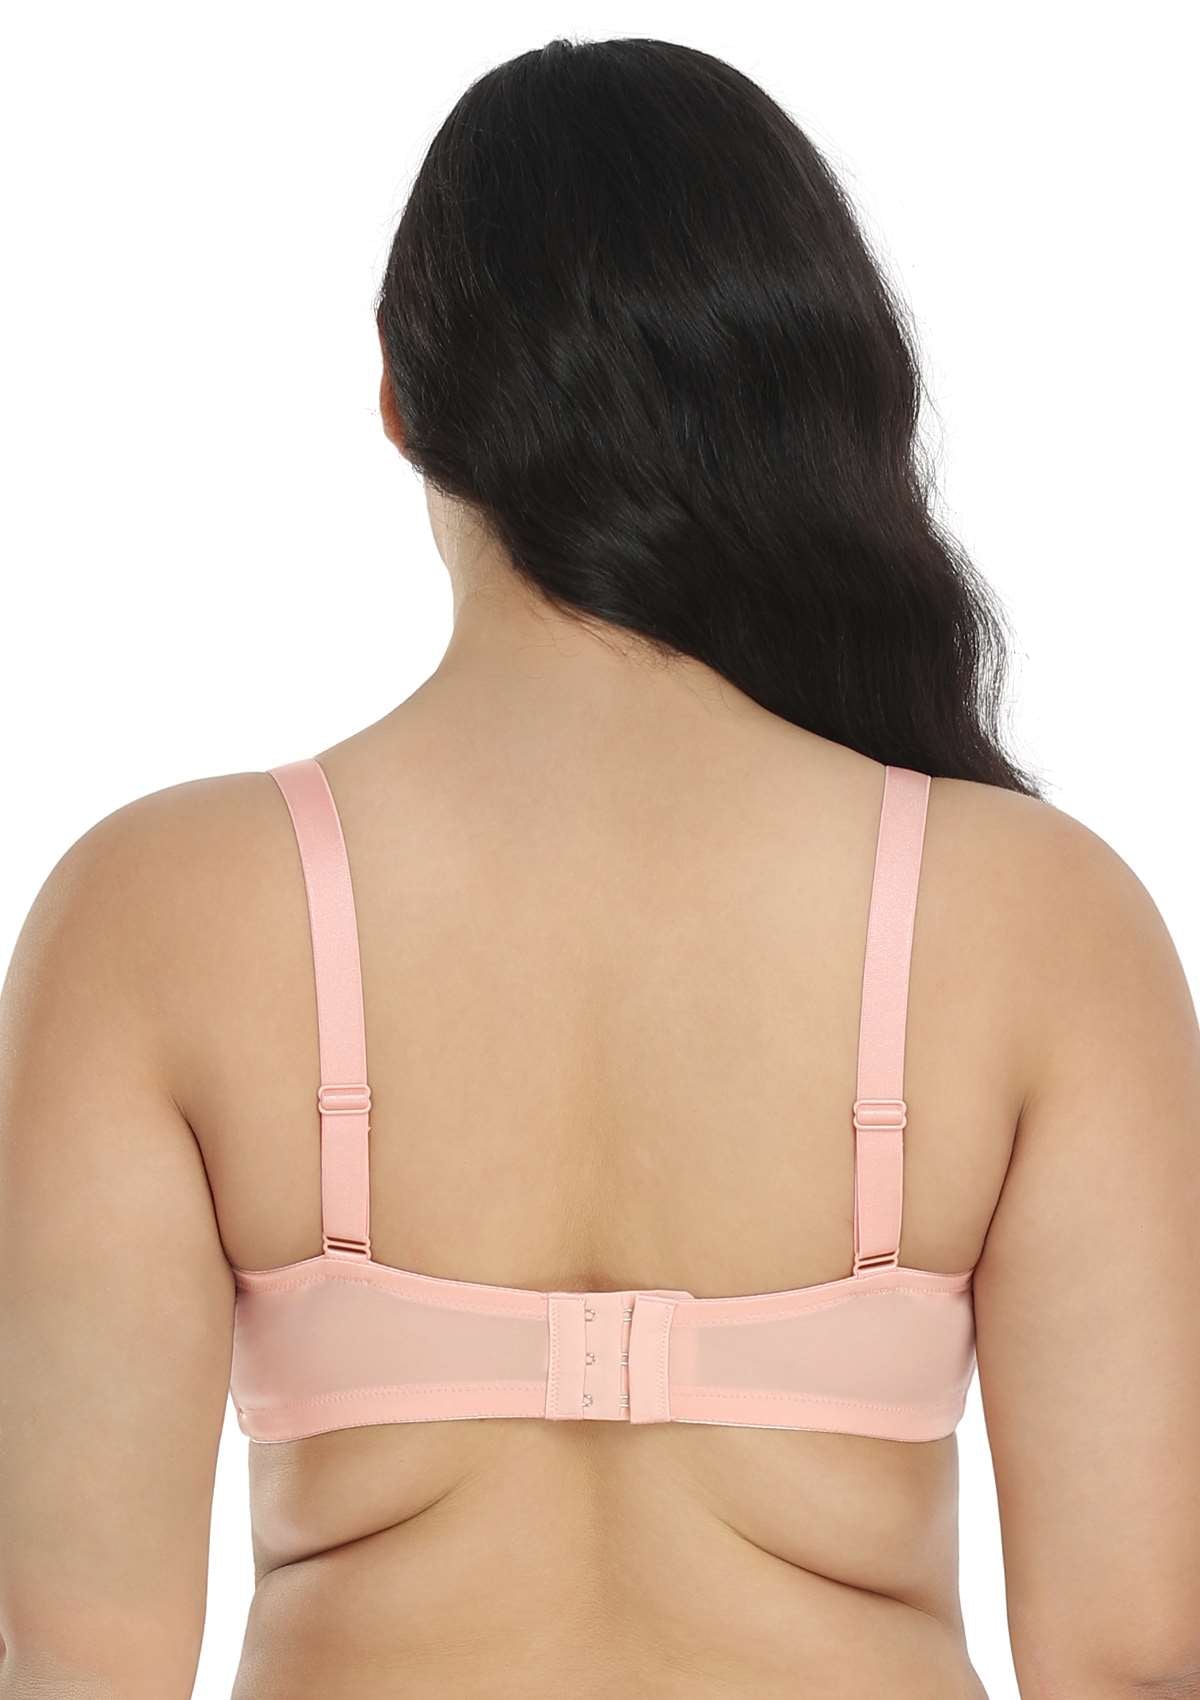 HSIA Rosa Bonica Sheer Lace Mesh Unlined Thin Comfy Woman Bra - Pink / 34 / C